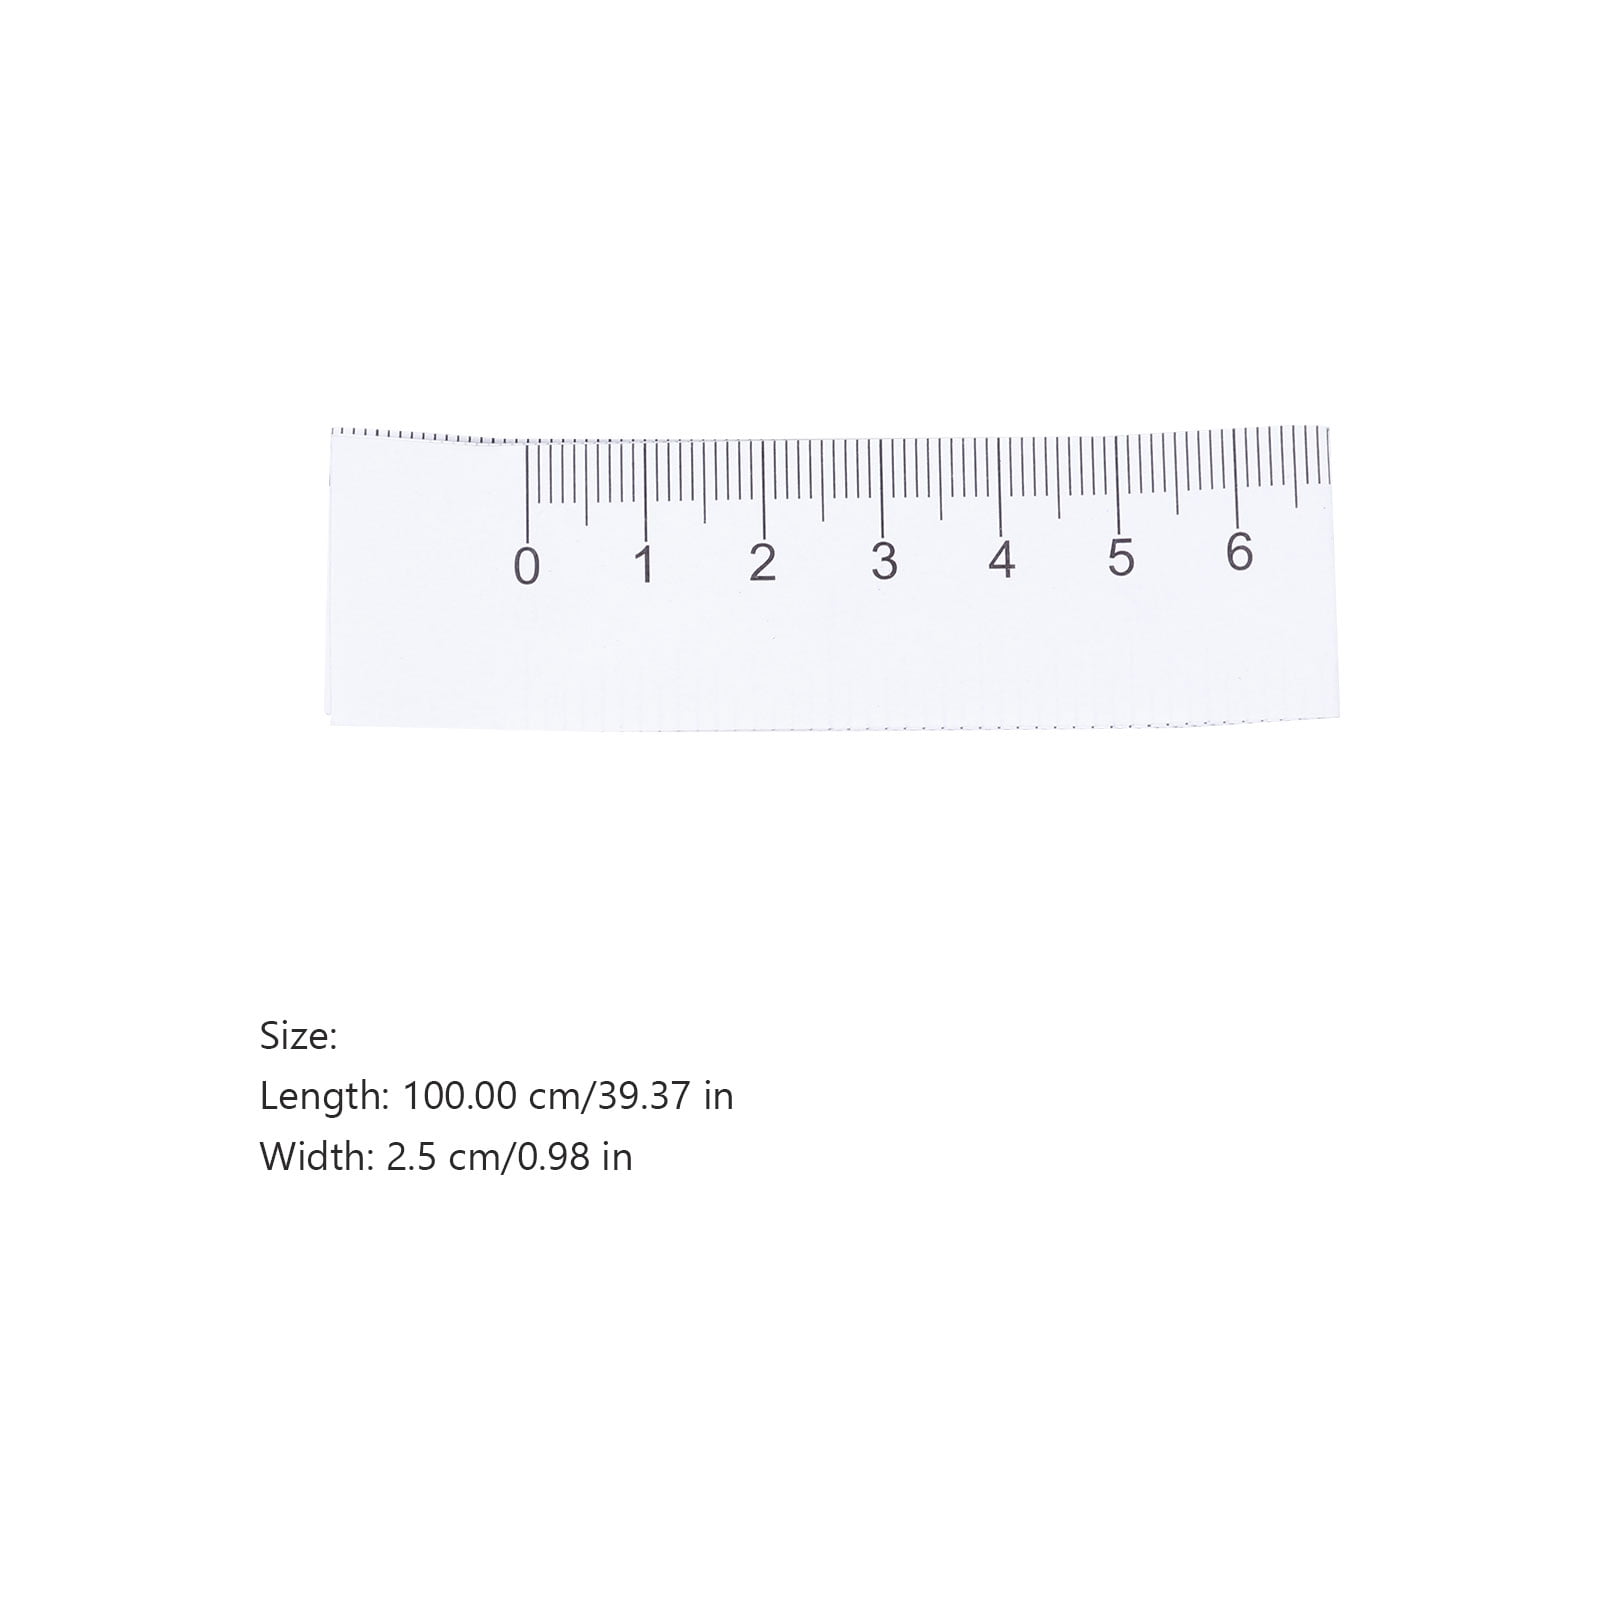 Hospital Used Disposable Paper Tape Measures Manufacturers - Customized Tape  - WINTAPE